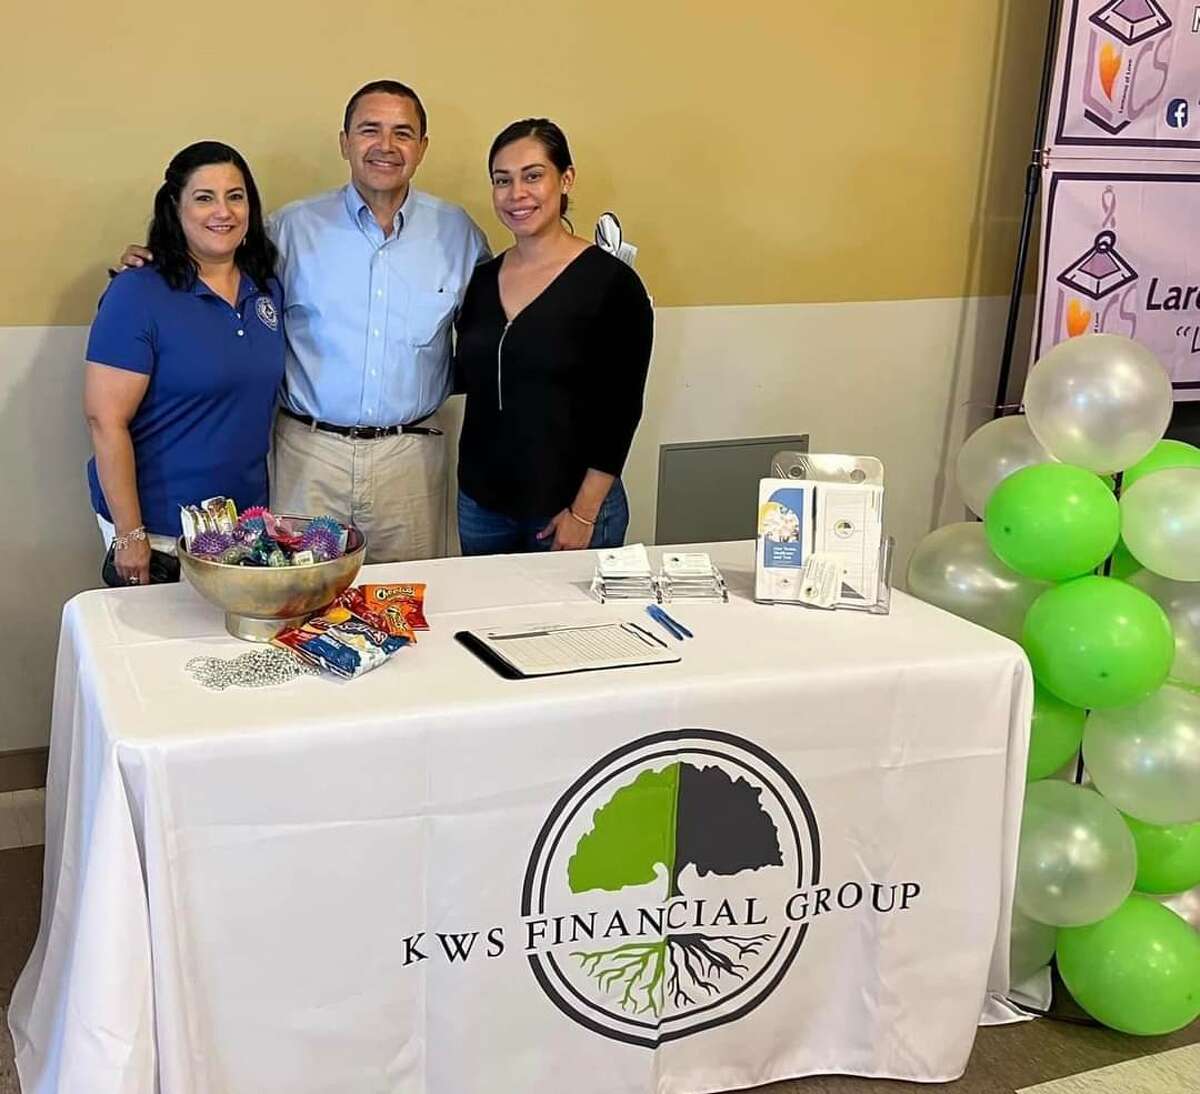 Liz Martinez (right side in black) with Congressman Cuellar and another member of the KWS Financial Group. Images from the "Women's Health & Wellness Expo" held on evening Tuesday May 31, 2022 as part of the International Day for Women's Health. Women shopped around as they look for what services and resources are offered in the community. 